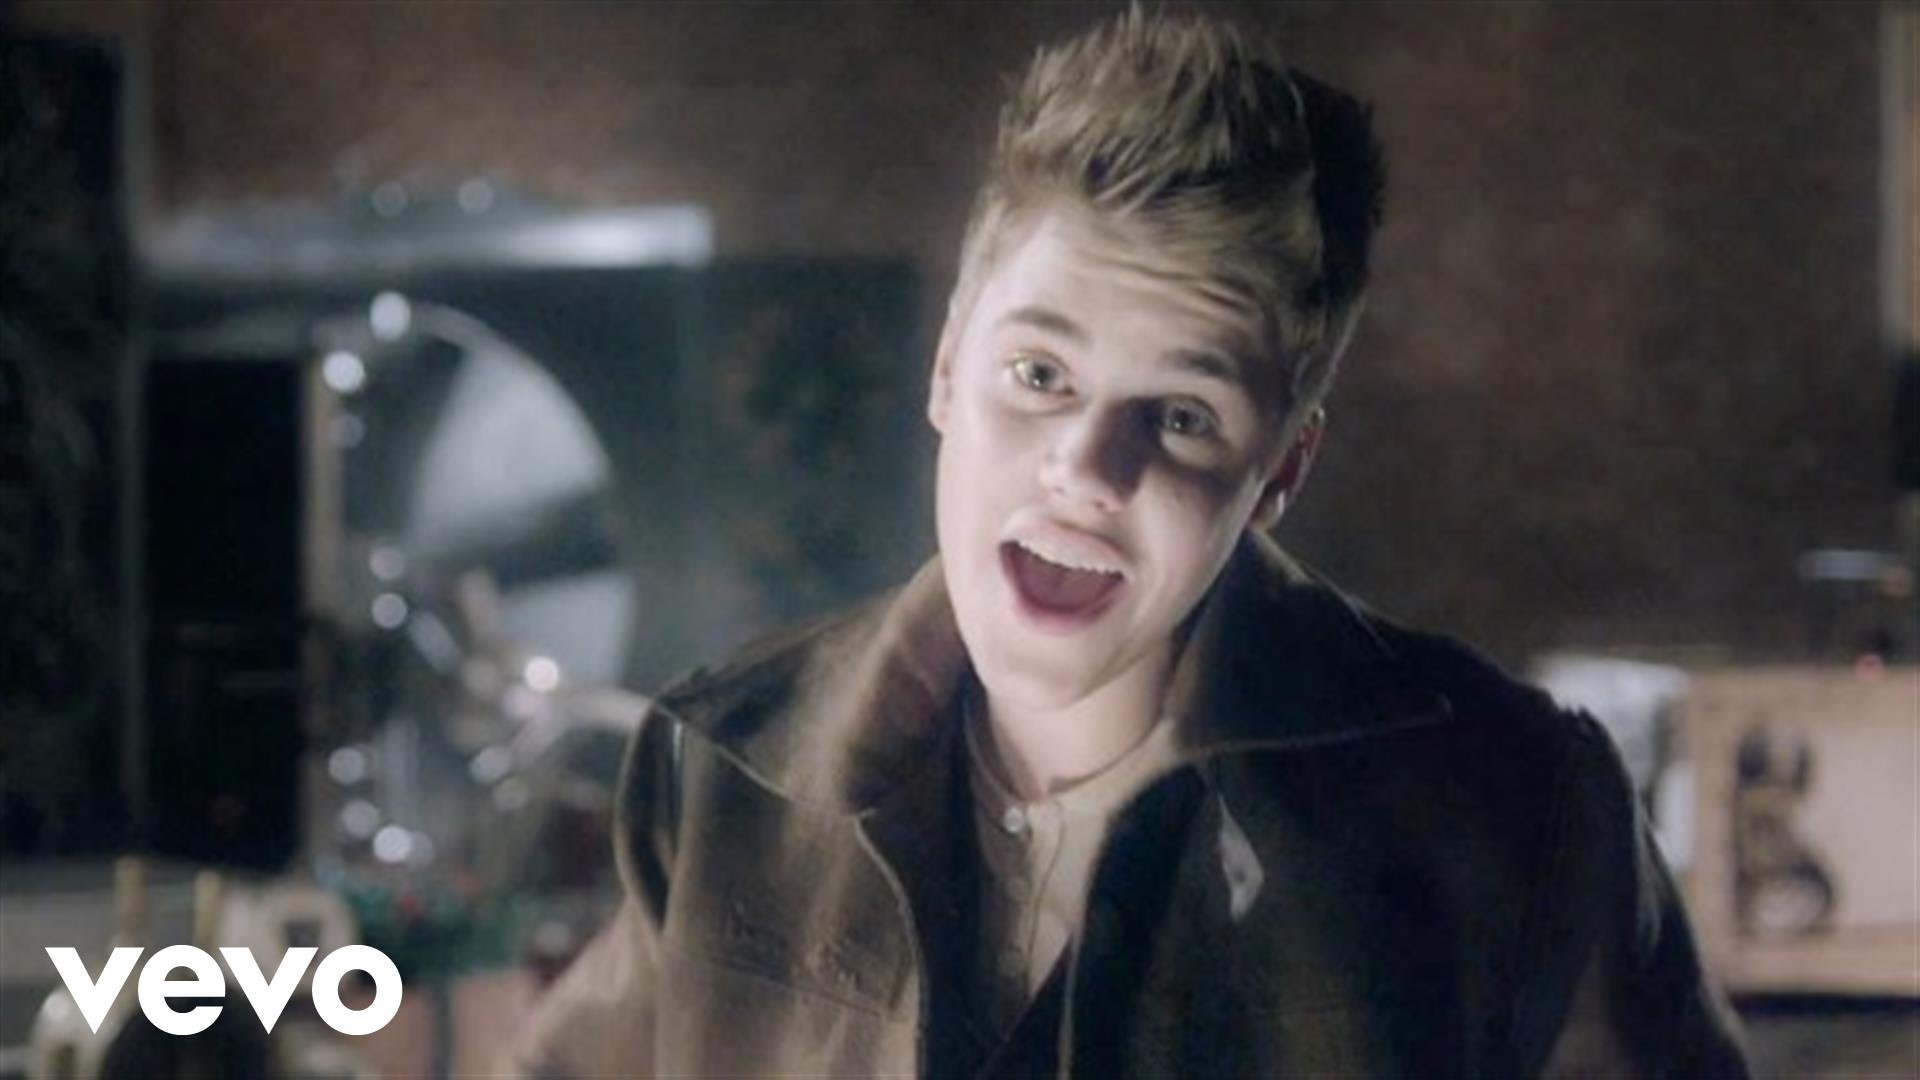 1920x1080 Justin Bieber - Santa Claus Is Coming To Town (Arthur Christmas Version) -  YouTube